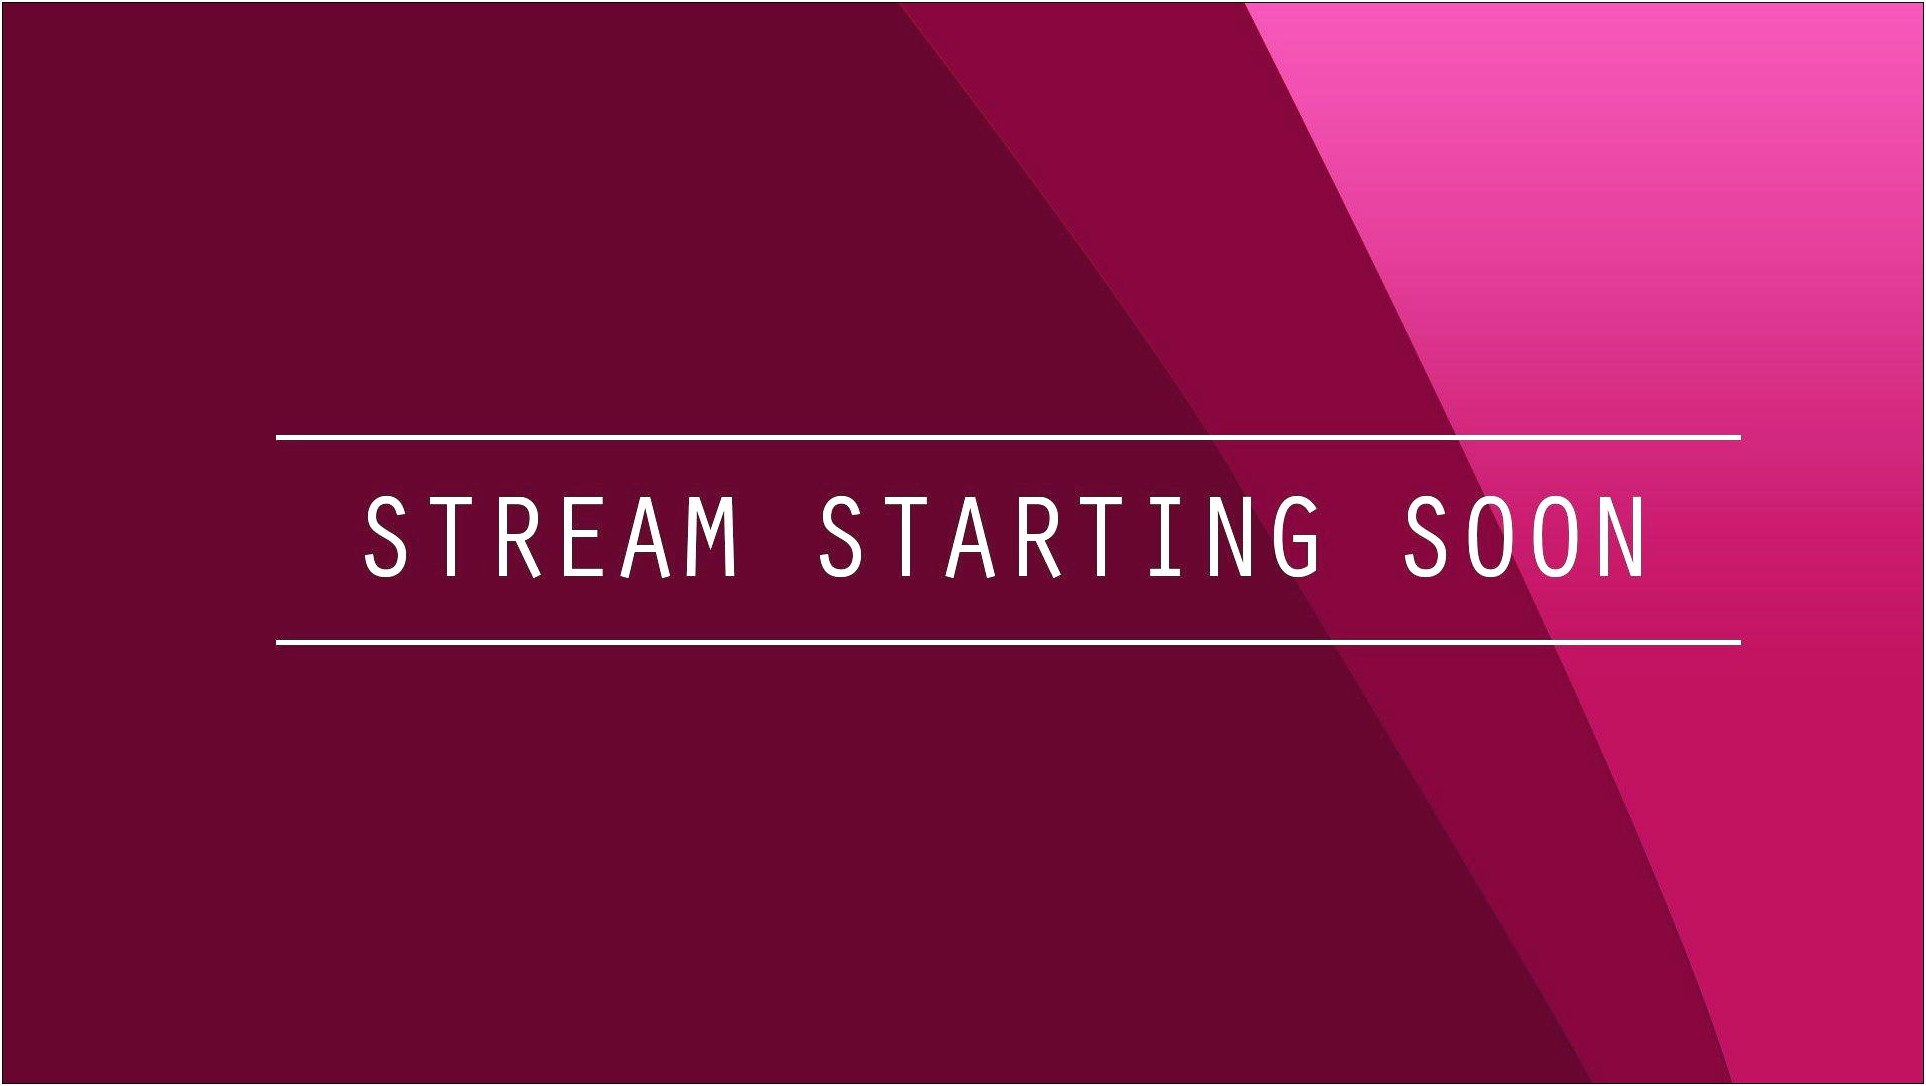 Stream Is Starting Soon Template Free